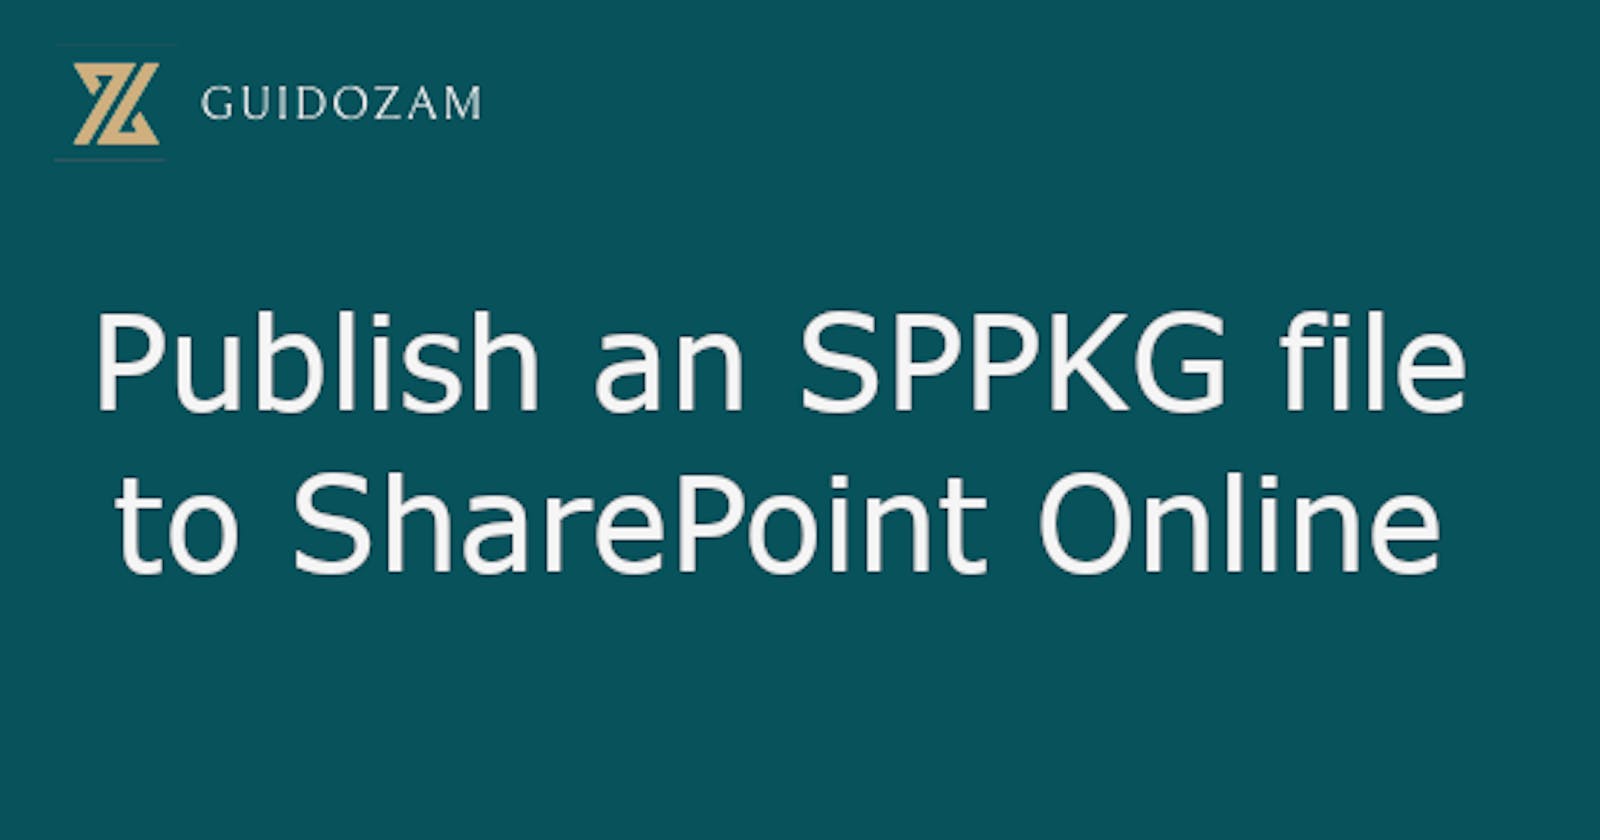 Publish an SPPKG file to SharePoint Online